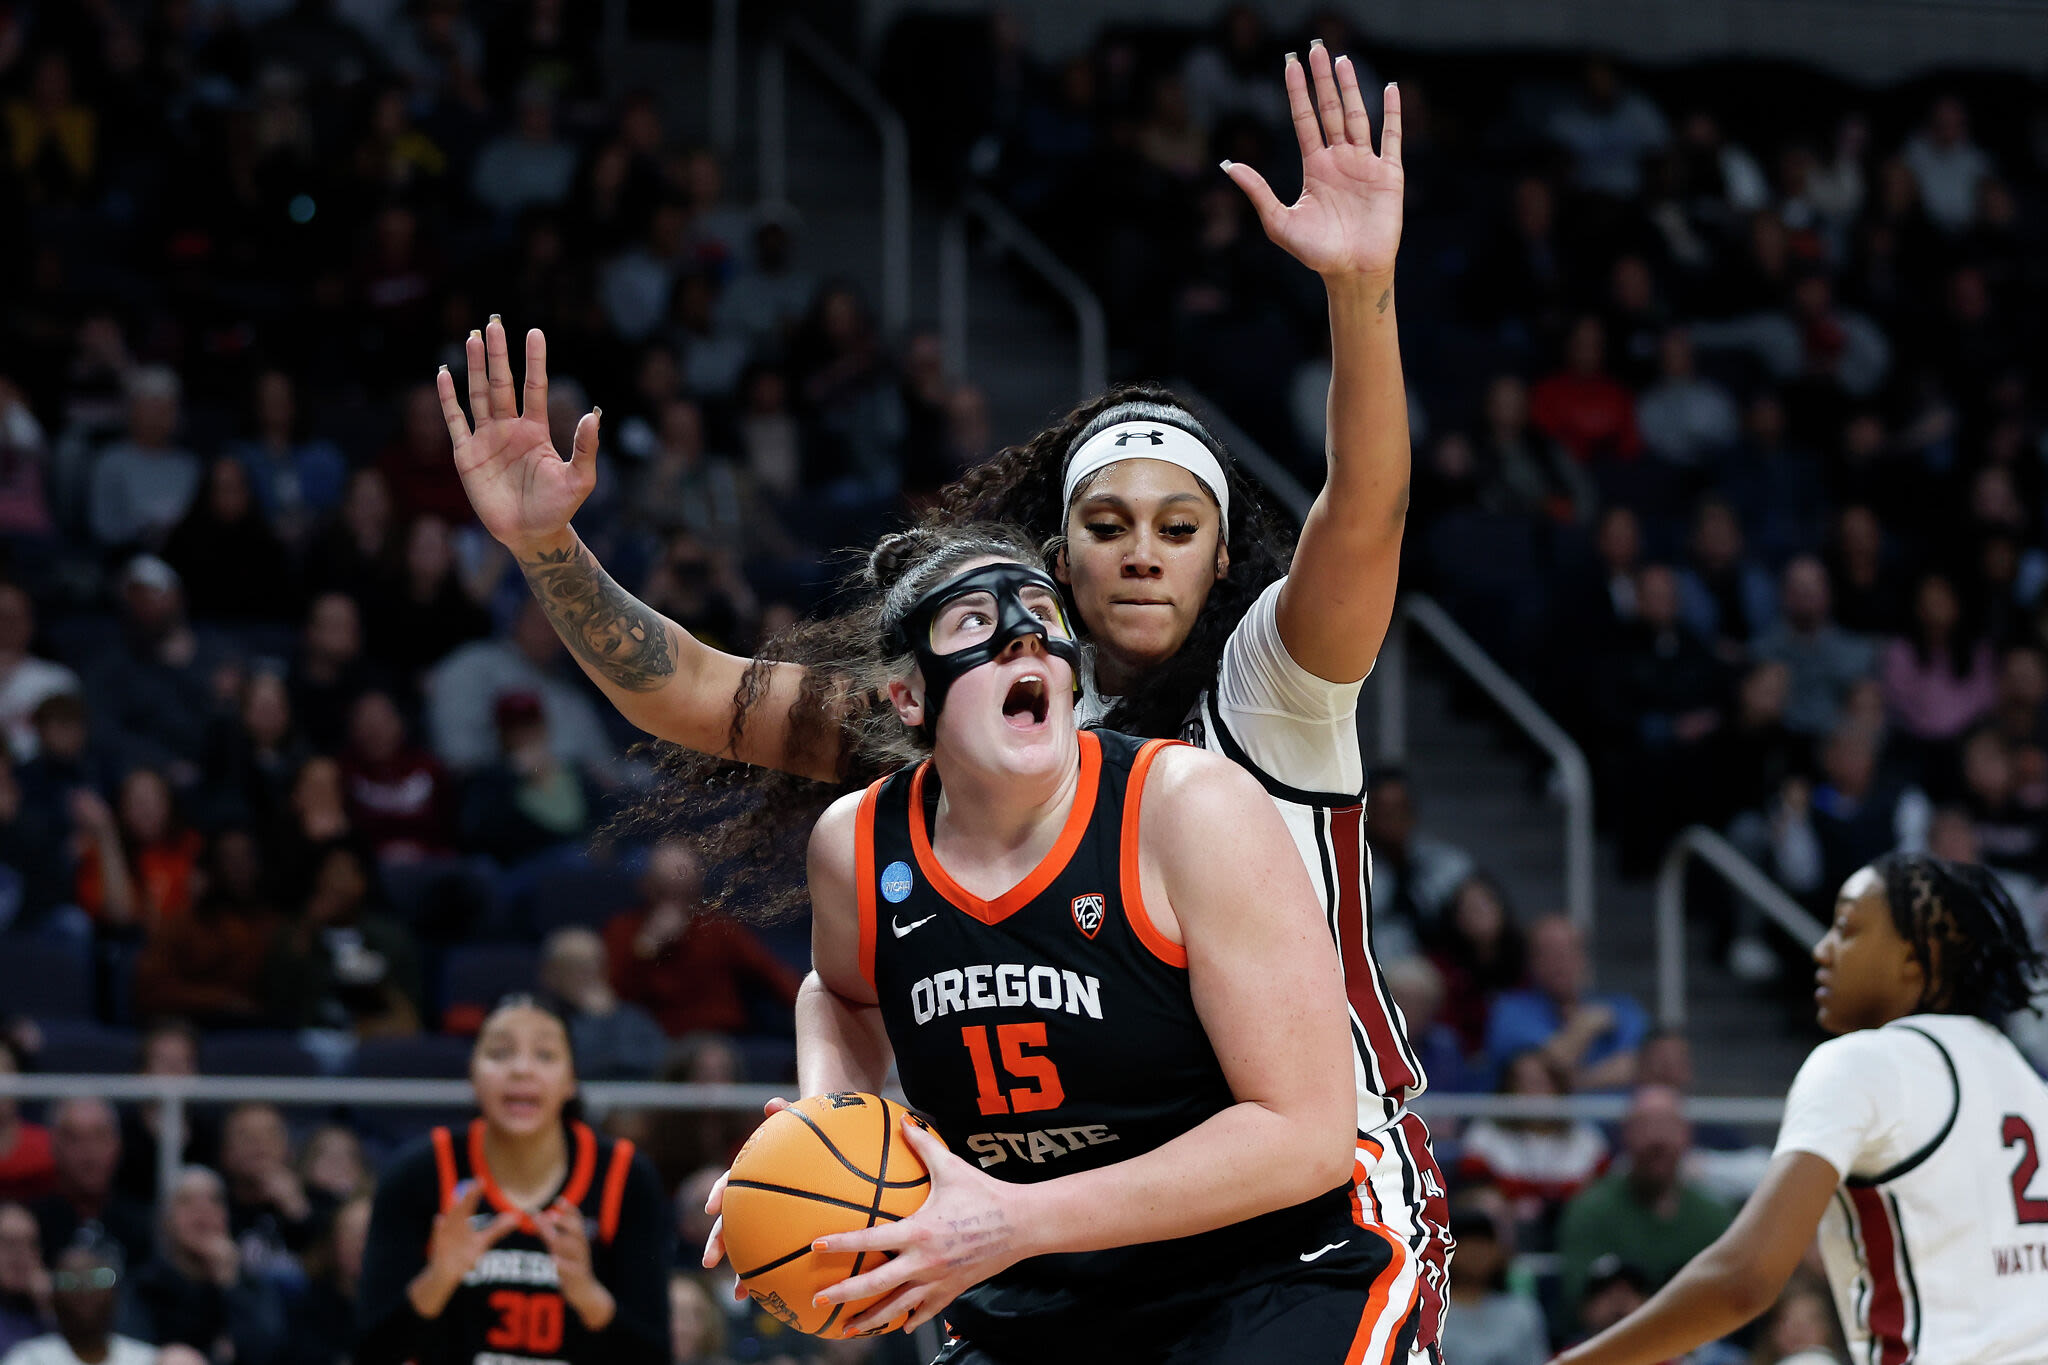 Oregon State transfer center Raegan Beers chooses Oklahoma over UConn. What's next for Huskies?